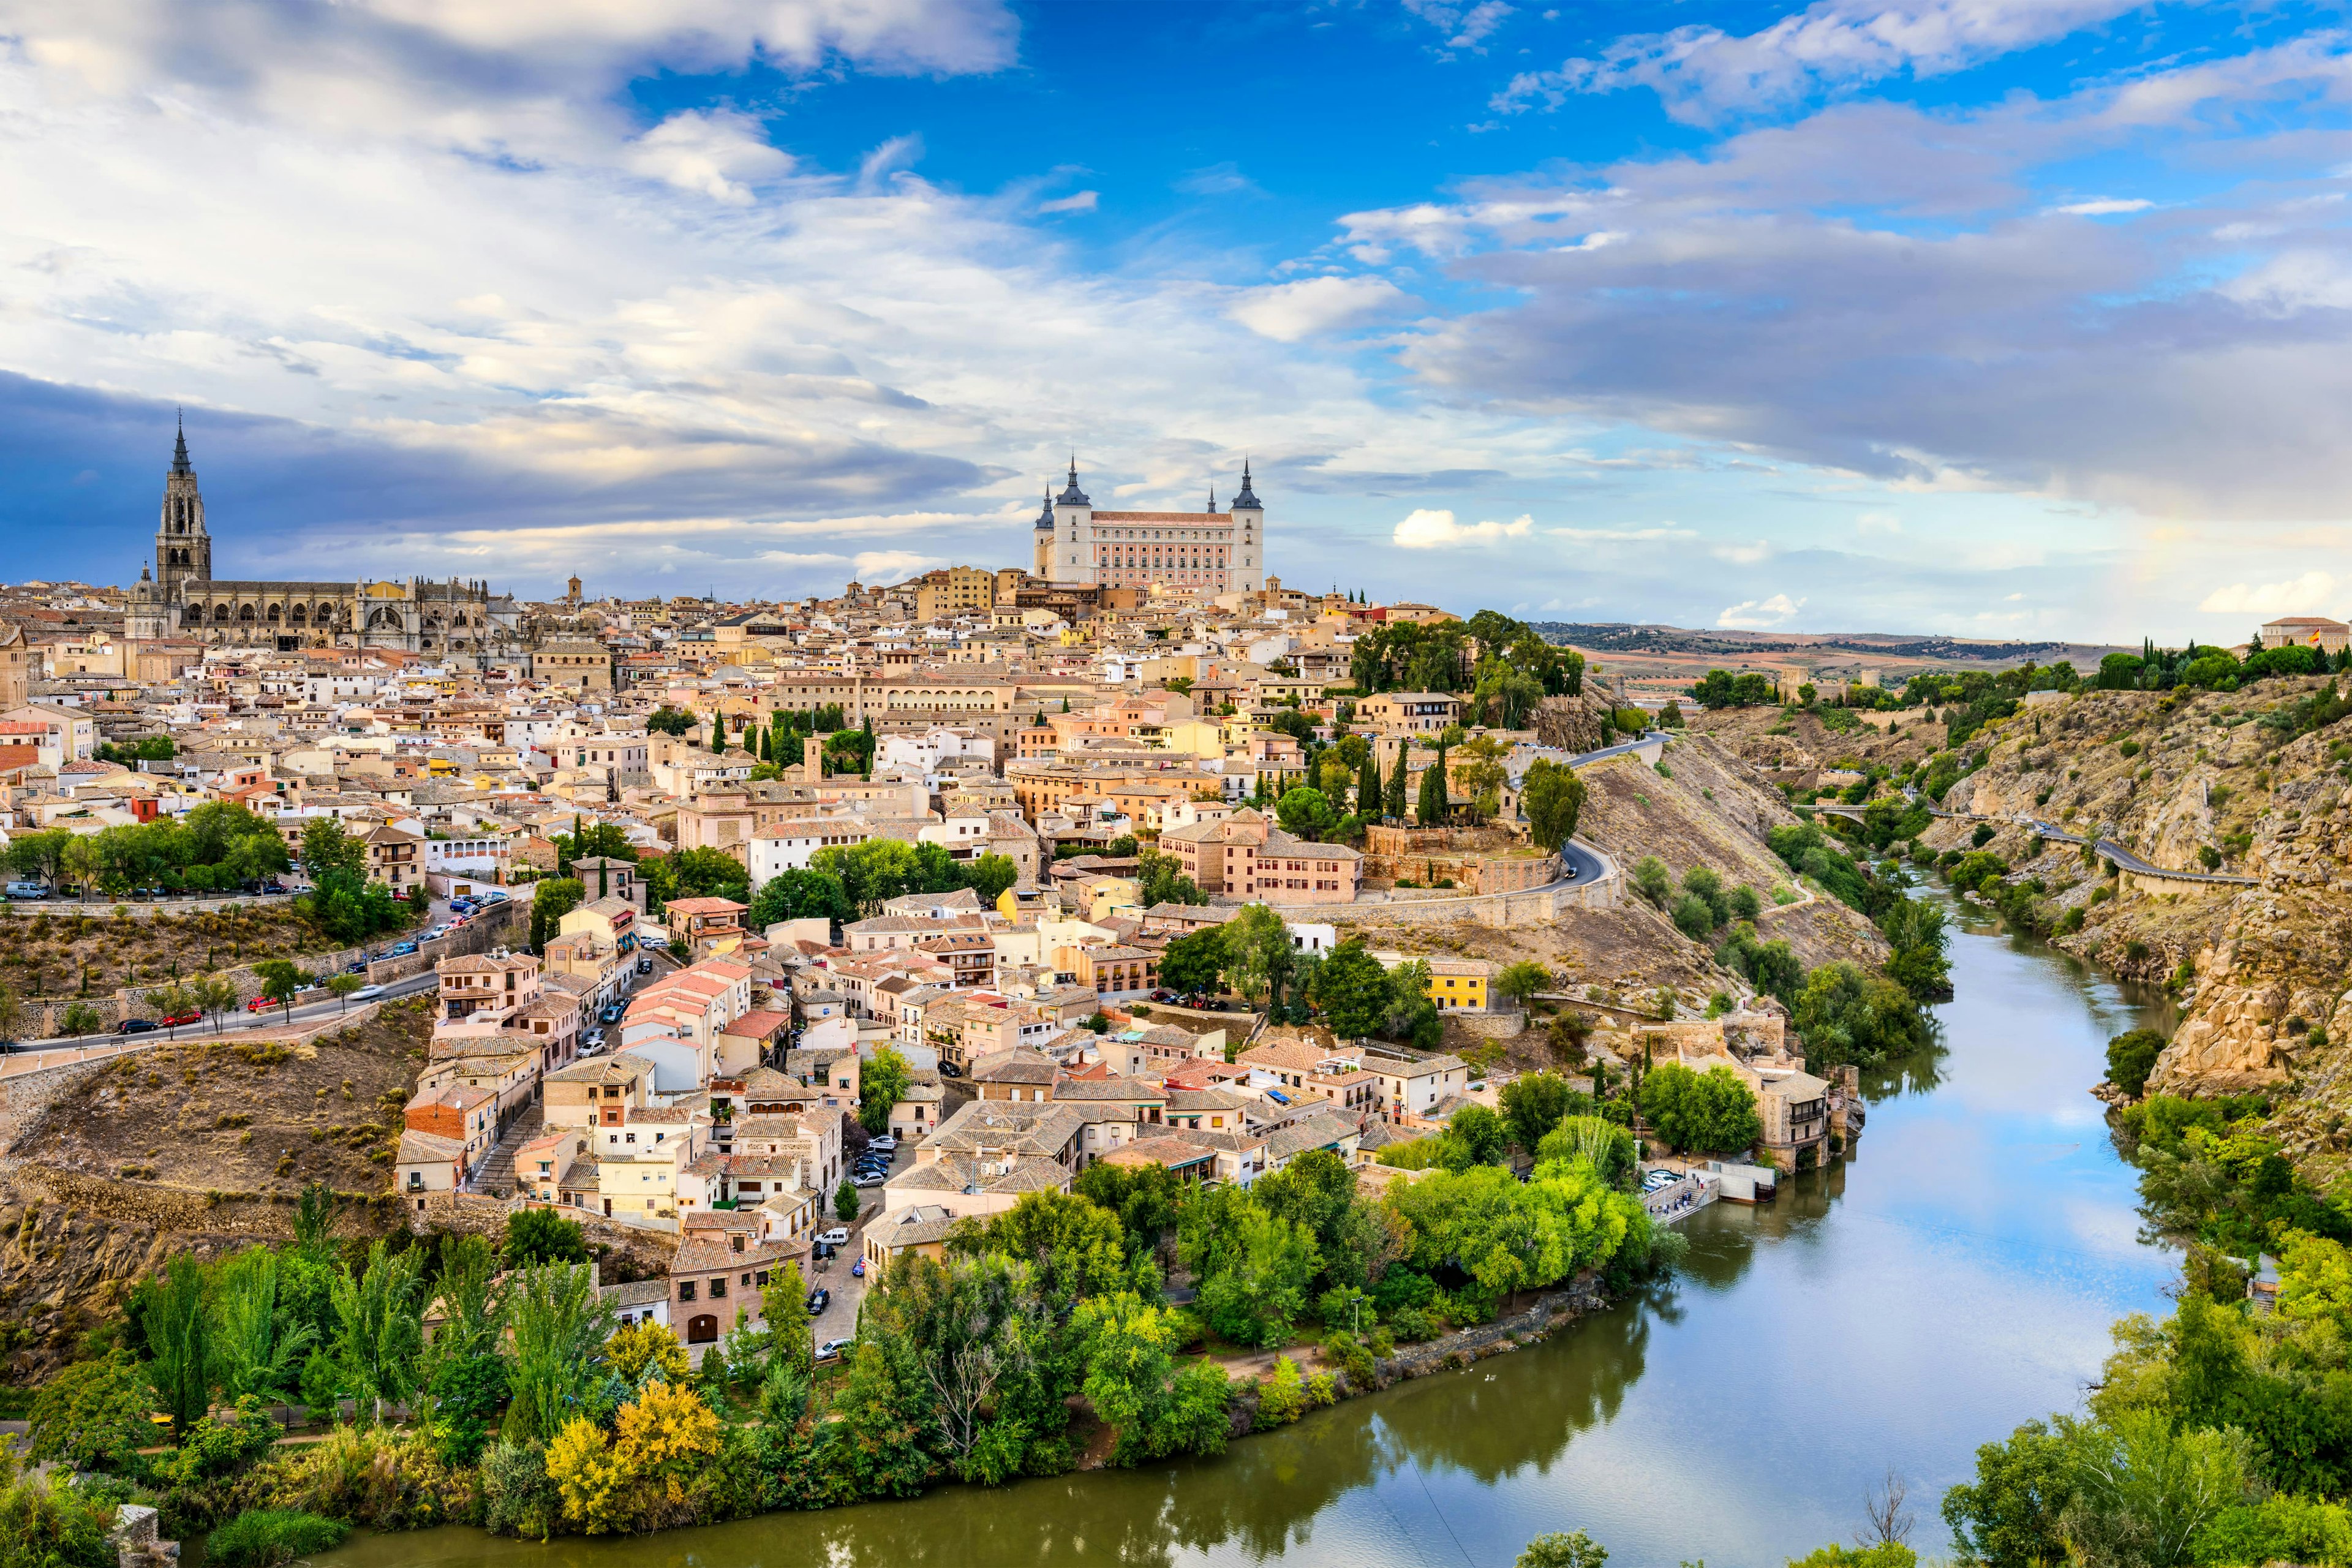 Medieval Toledo: The City of Three Cultures